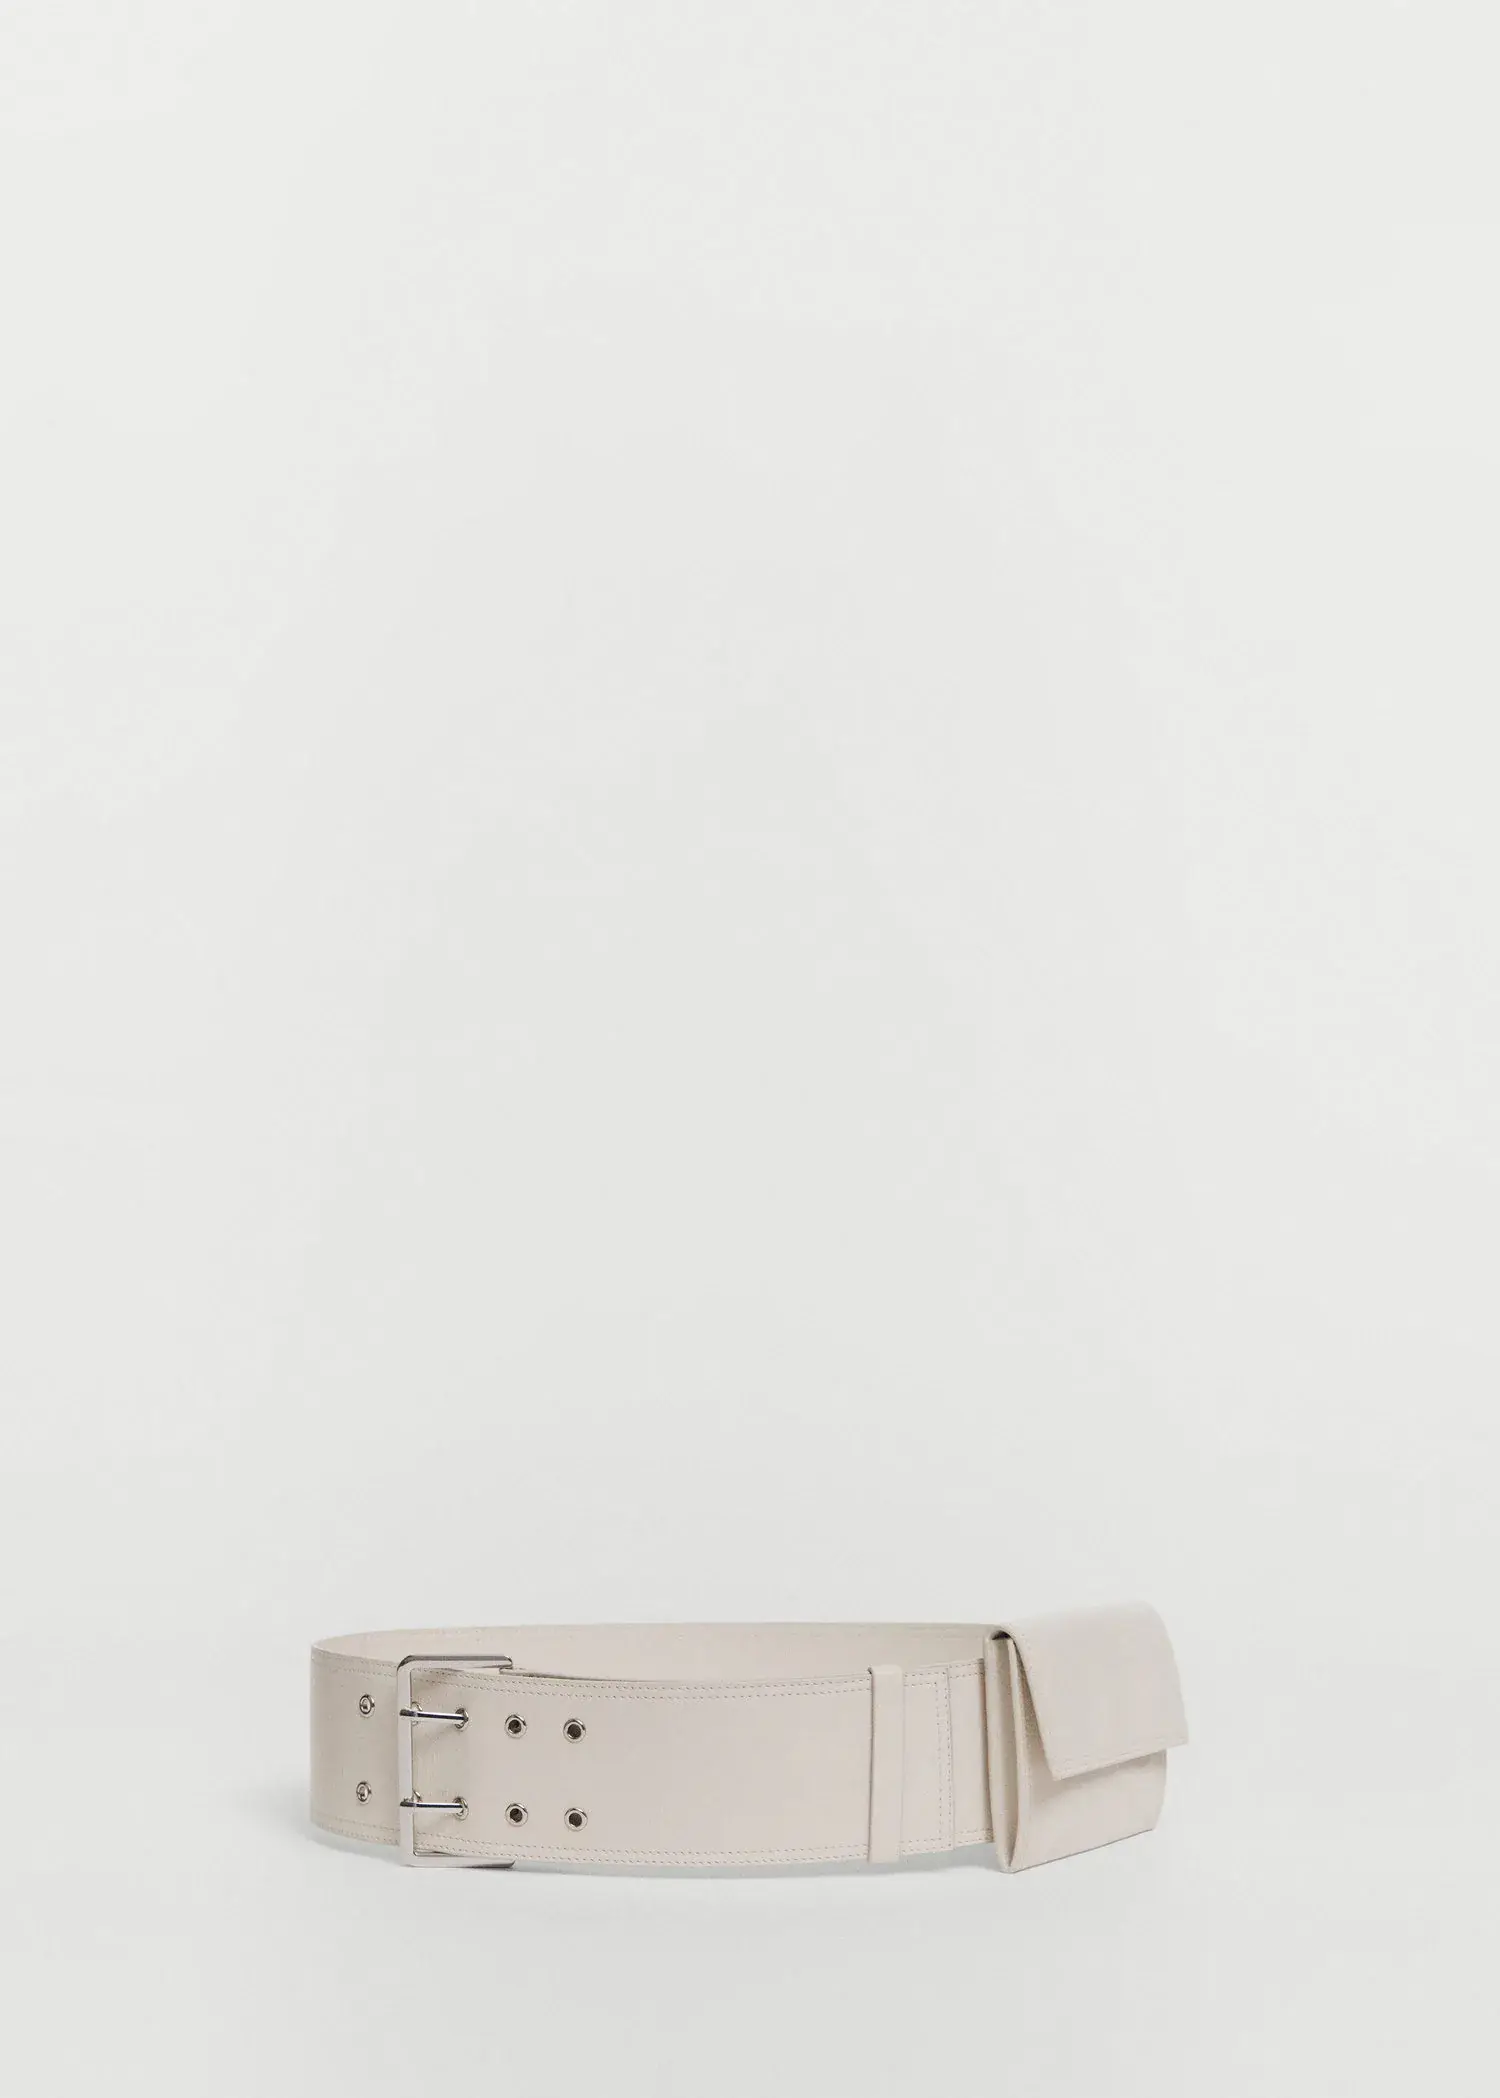 Mango Belted leather fanny pack. 2